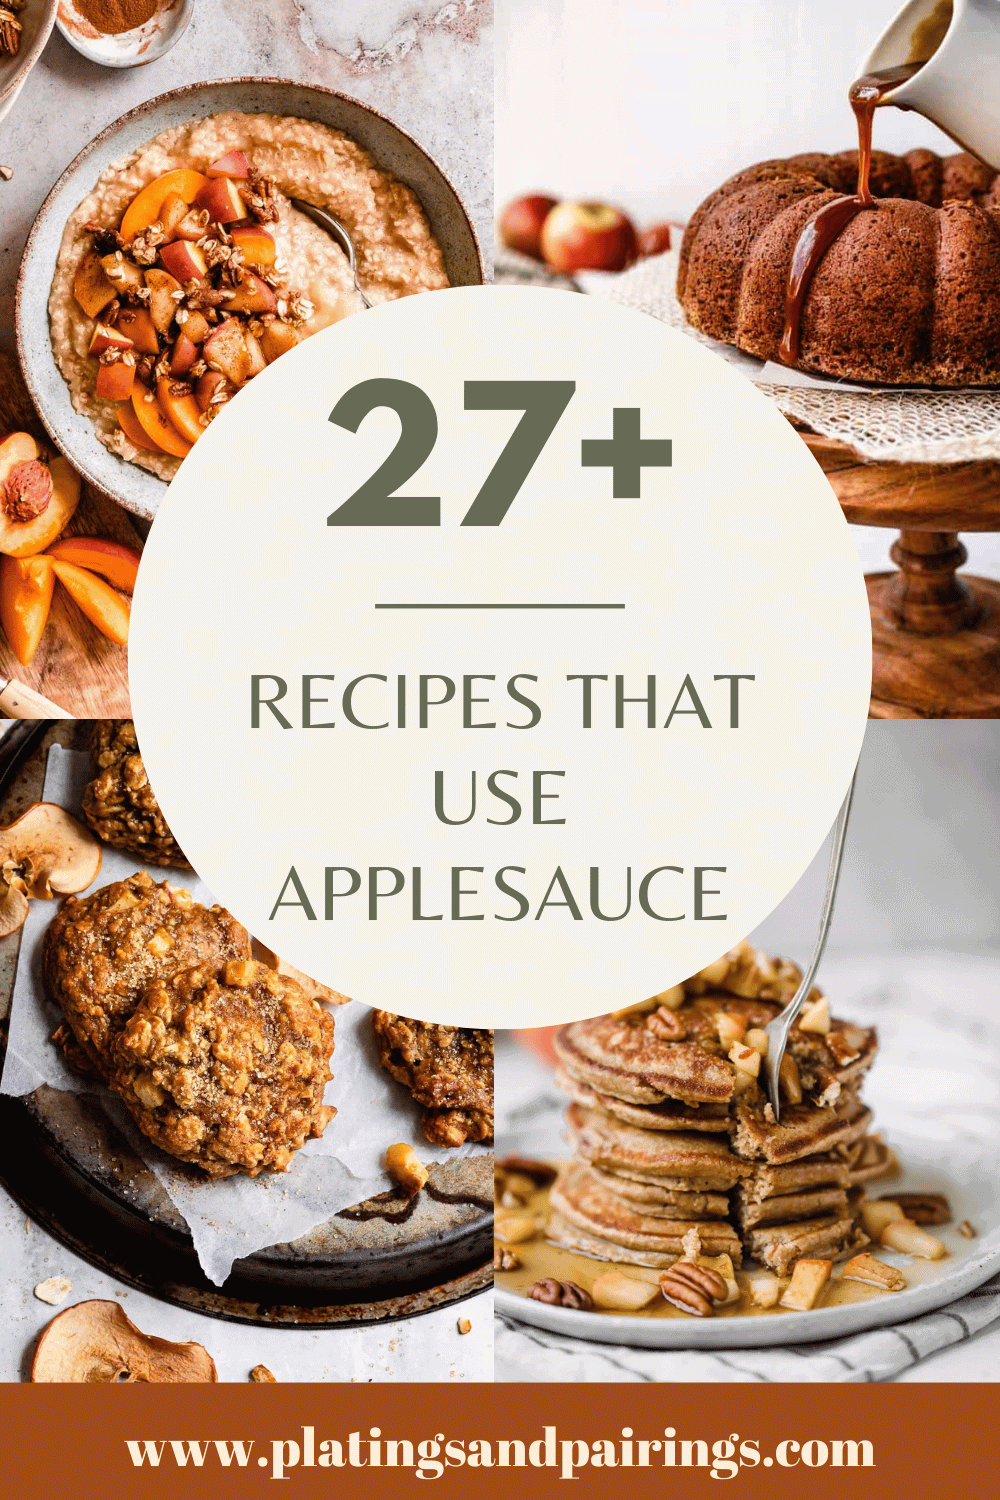 Collage of recipes that use applesauce with text overlay.